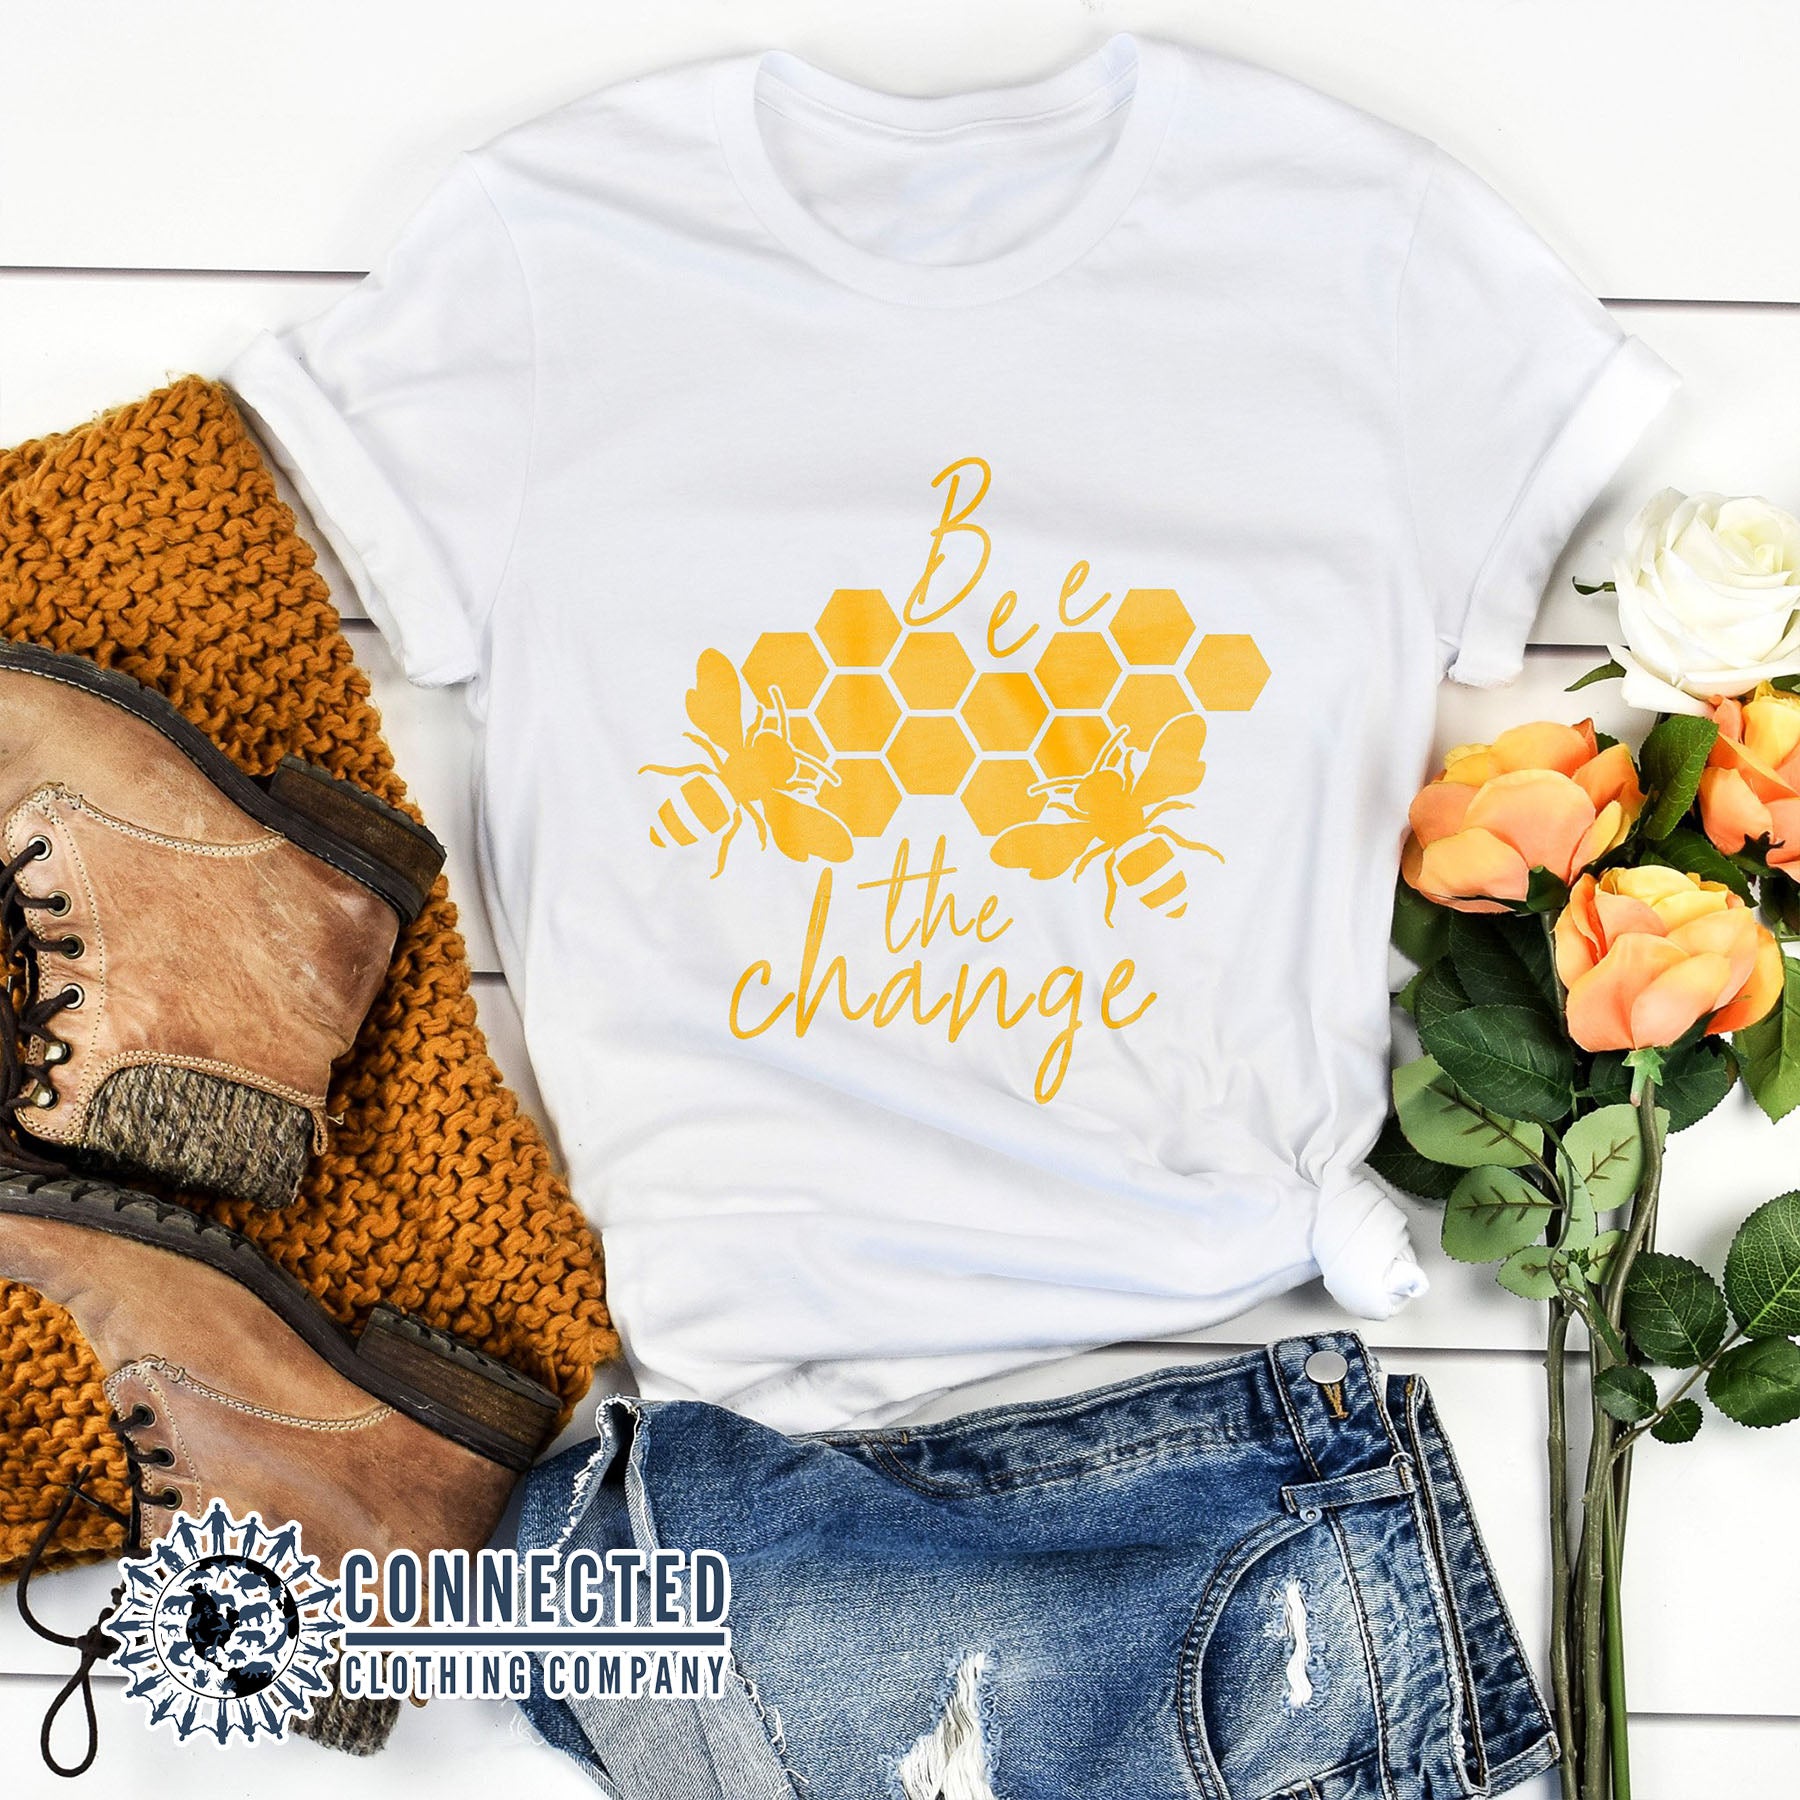 White Organic Cotton Bee The Change Short-Sleeve Tee - sweetsherriloudesigns - Ethically and Sustainably Made - 10% of profits donated to the Honeybee Conservancy